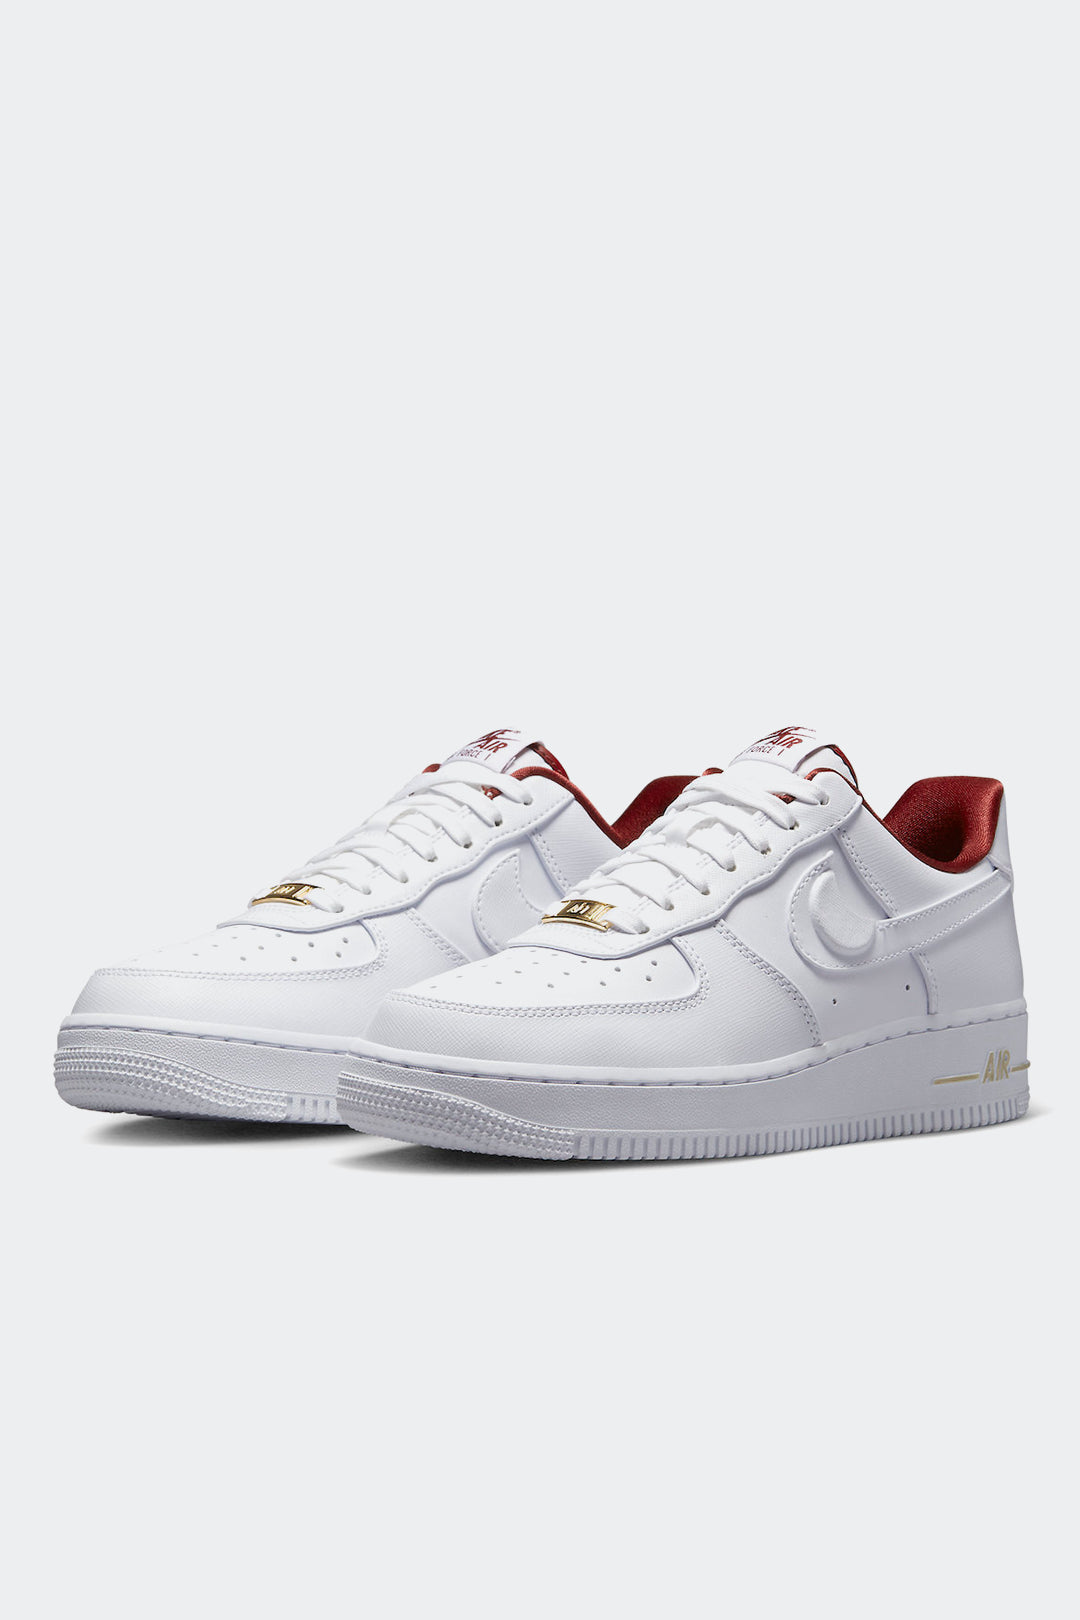 NIKE AIR FORCE 1 '07 SE "SWOOSH POCKET" - MUJER - HYPE